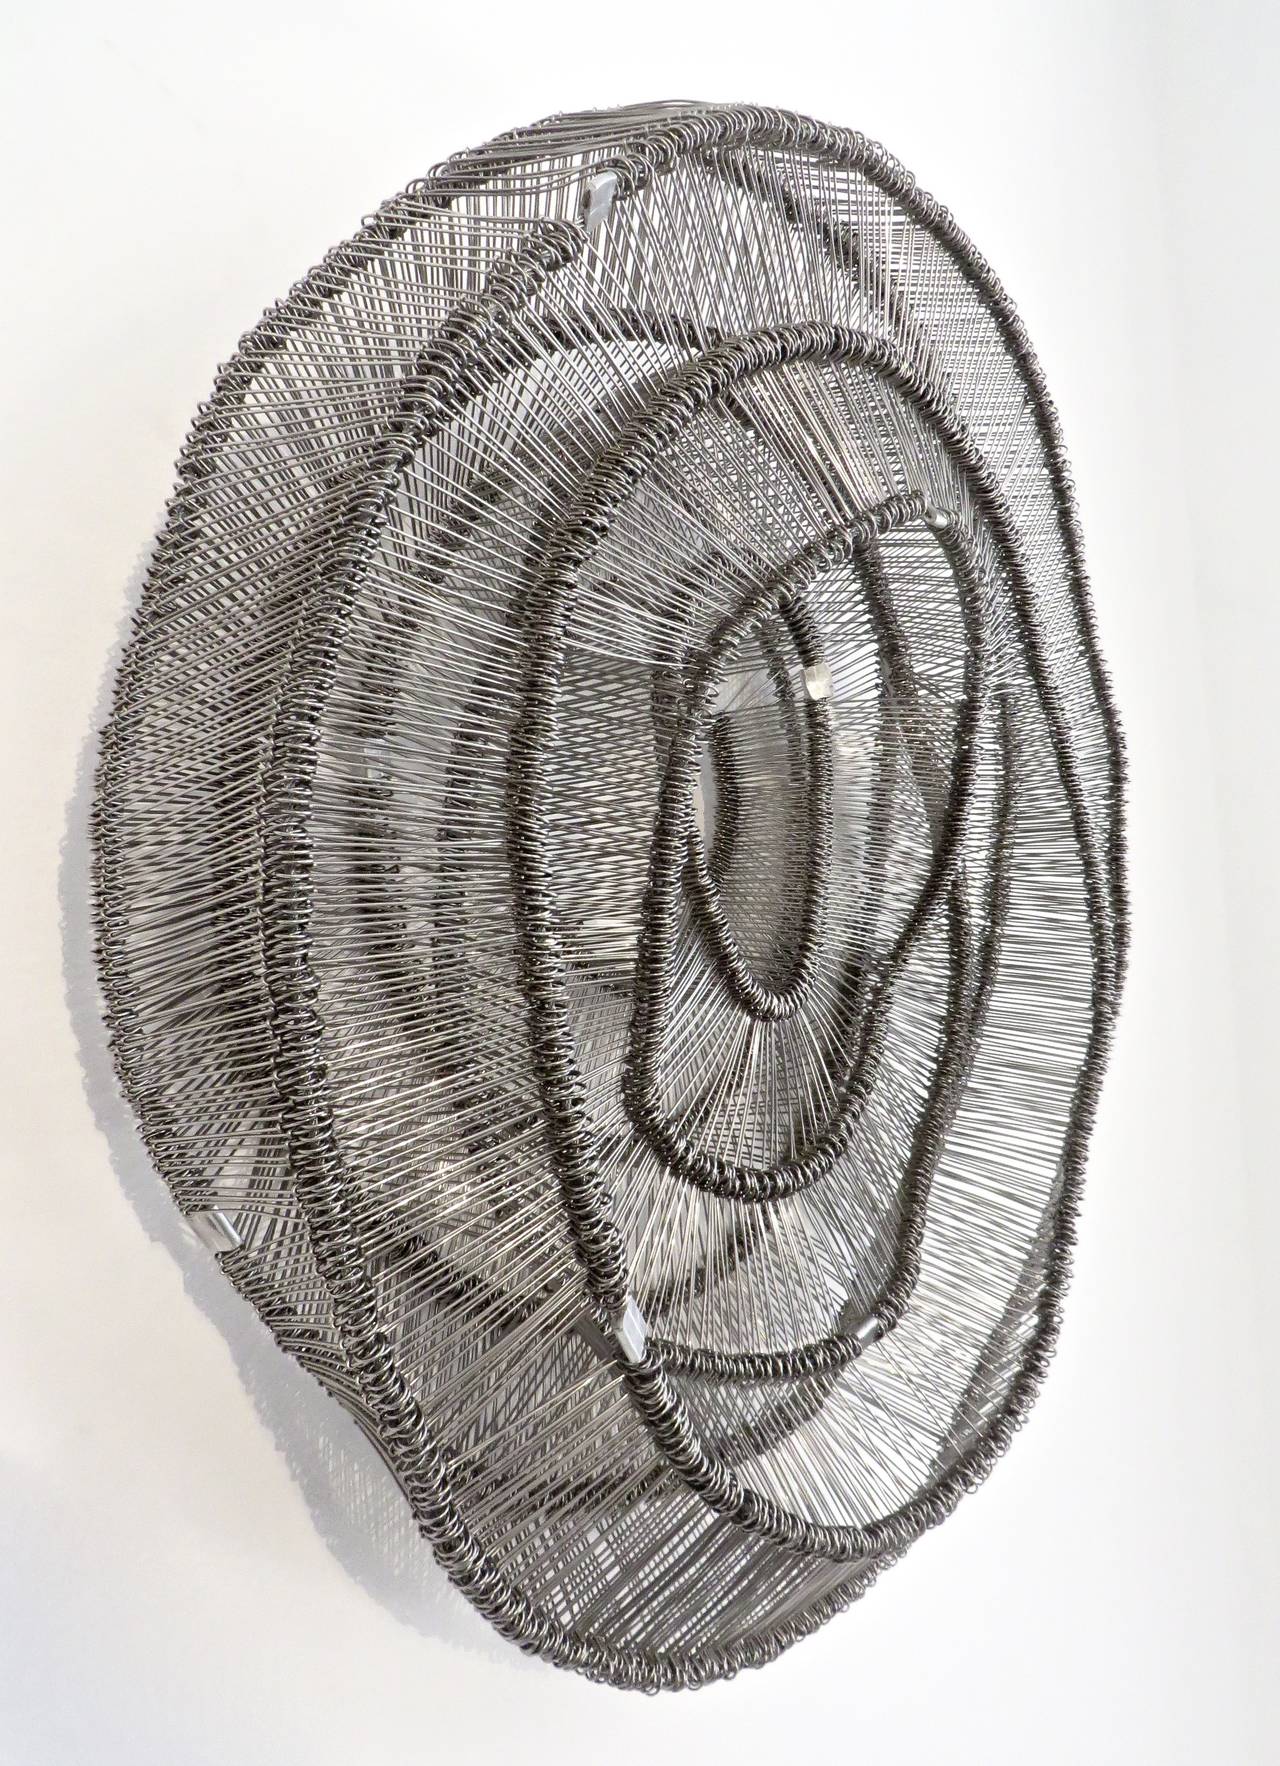 Eric Gushee Emergence Series No. 1 Stainless Steel Woven Metal Sculpture. 2015
From the exhibition: Product of the Moment at Pavilion.
Asymmetrical woven metal sculpture for the wall. 
Eric Gushee, is an artist living and working in Chicago.